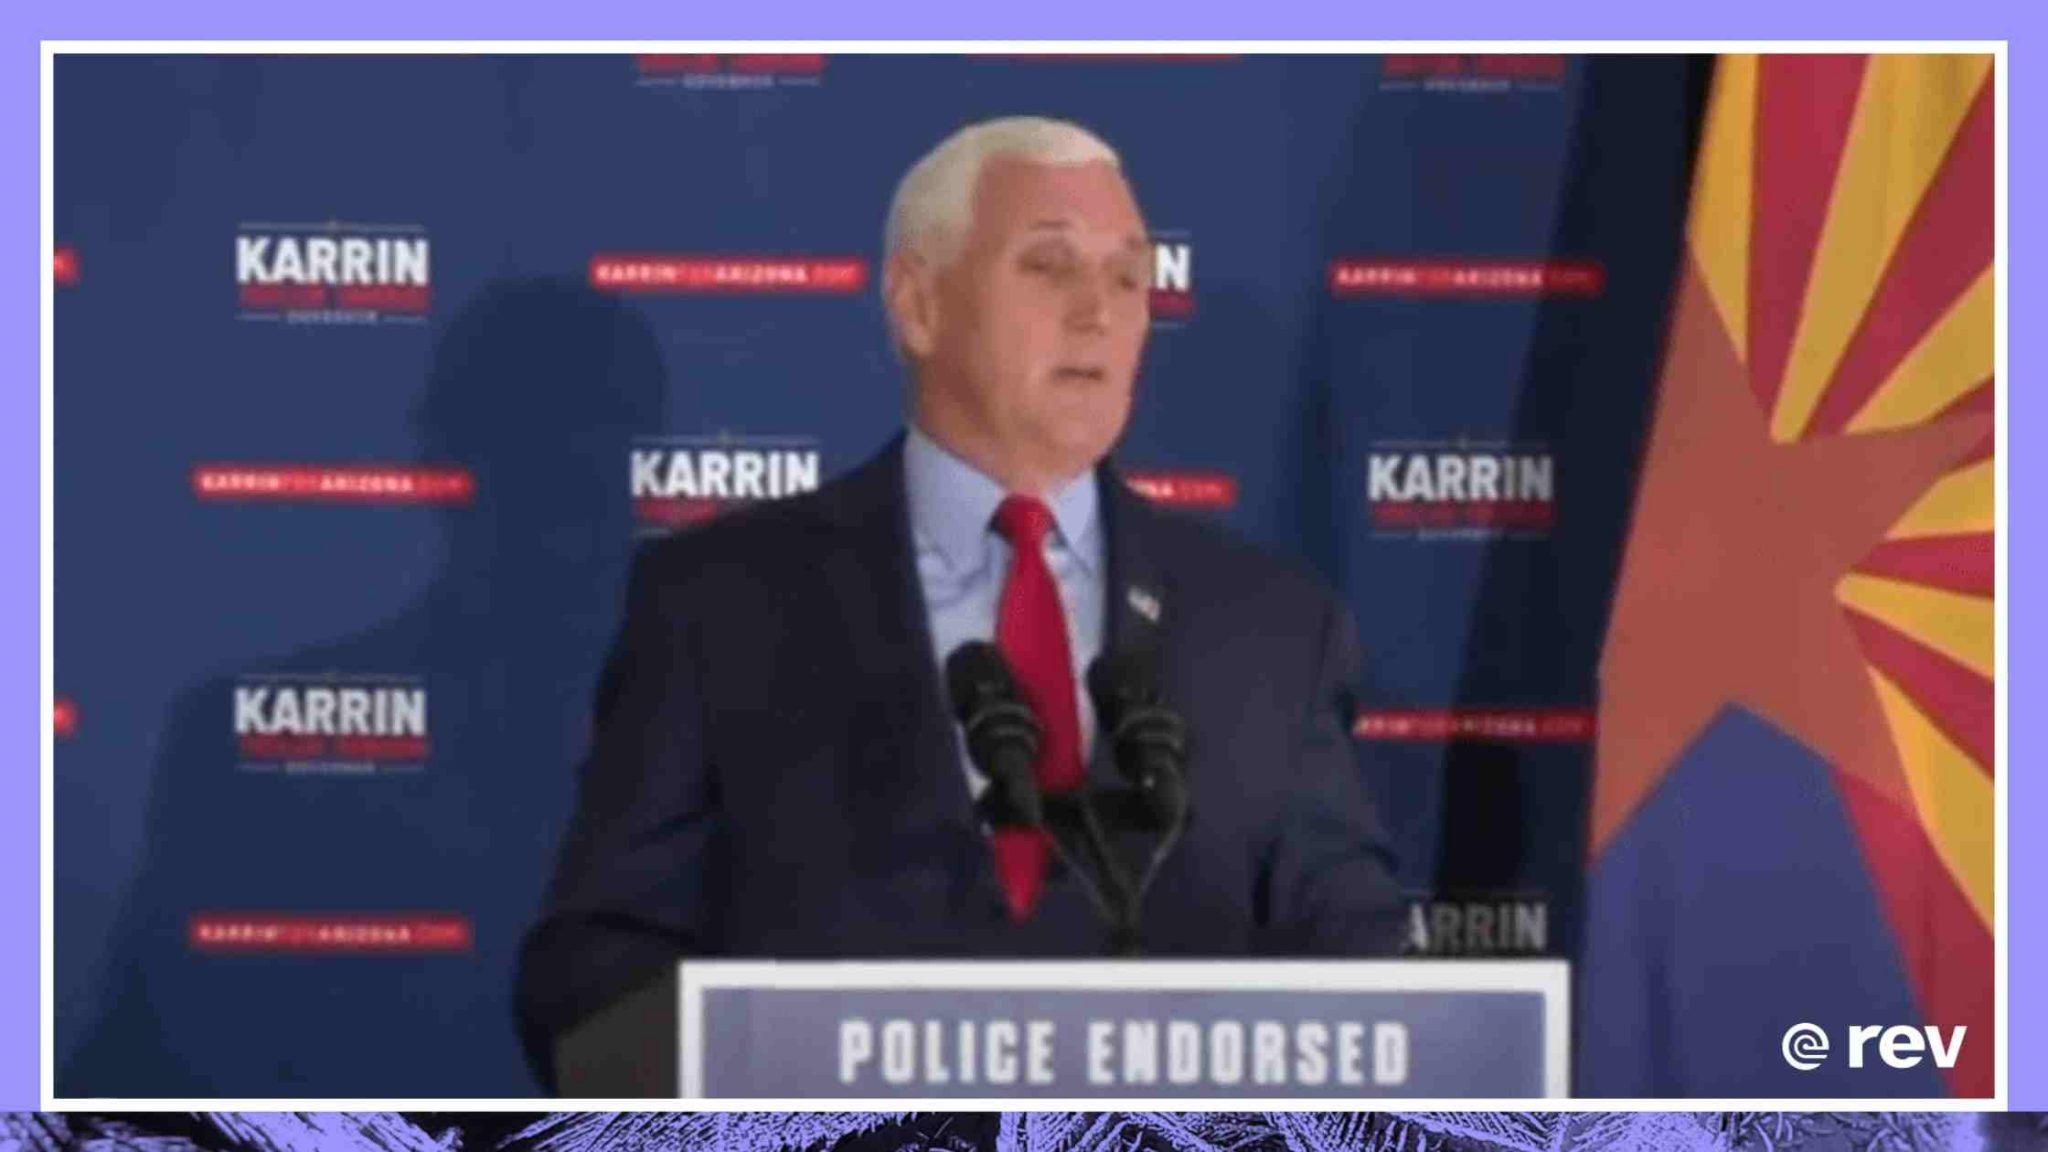 Mike Pence's Full Speech for Karrin Taylor Robson at TYR Tactical in Peoria, Arizona Transcript